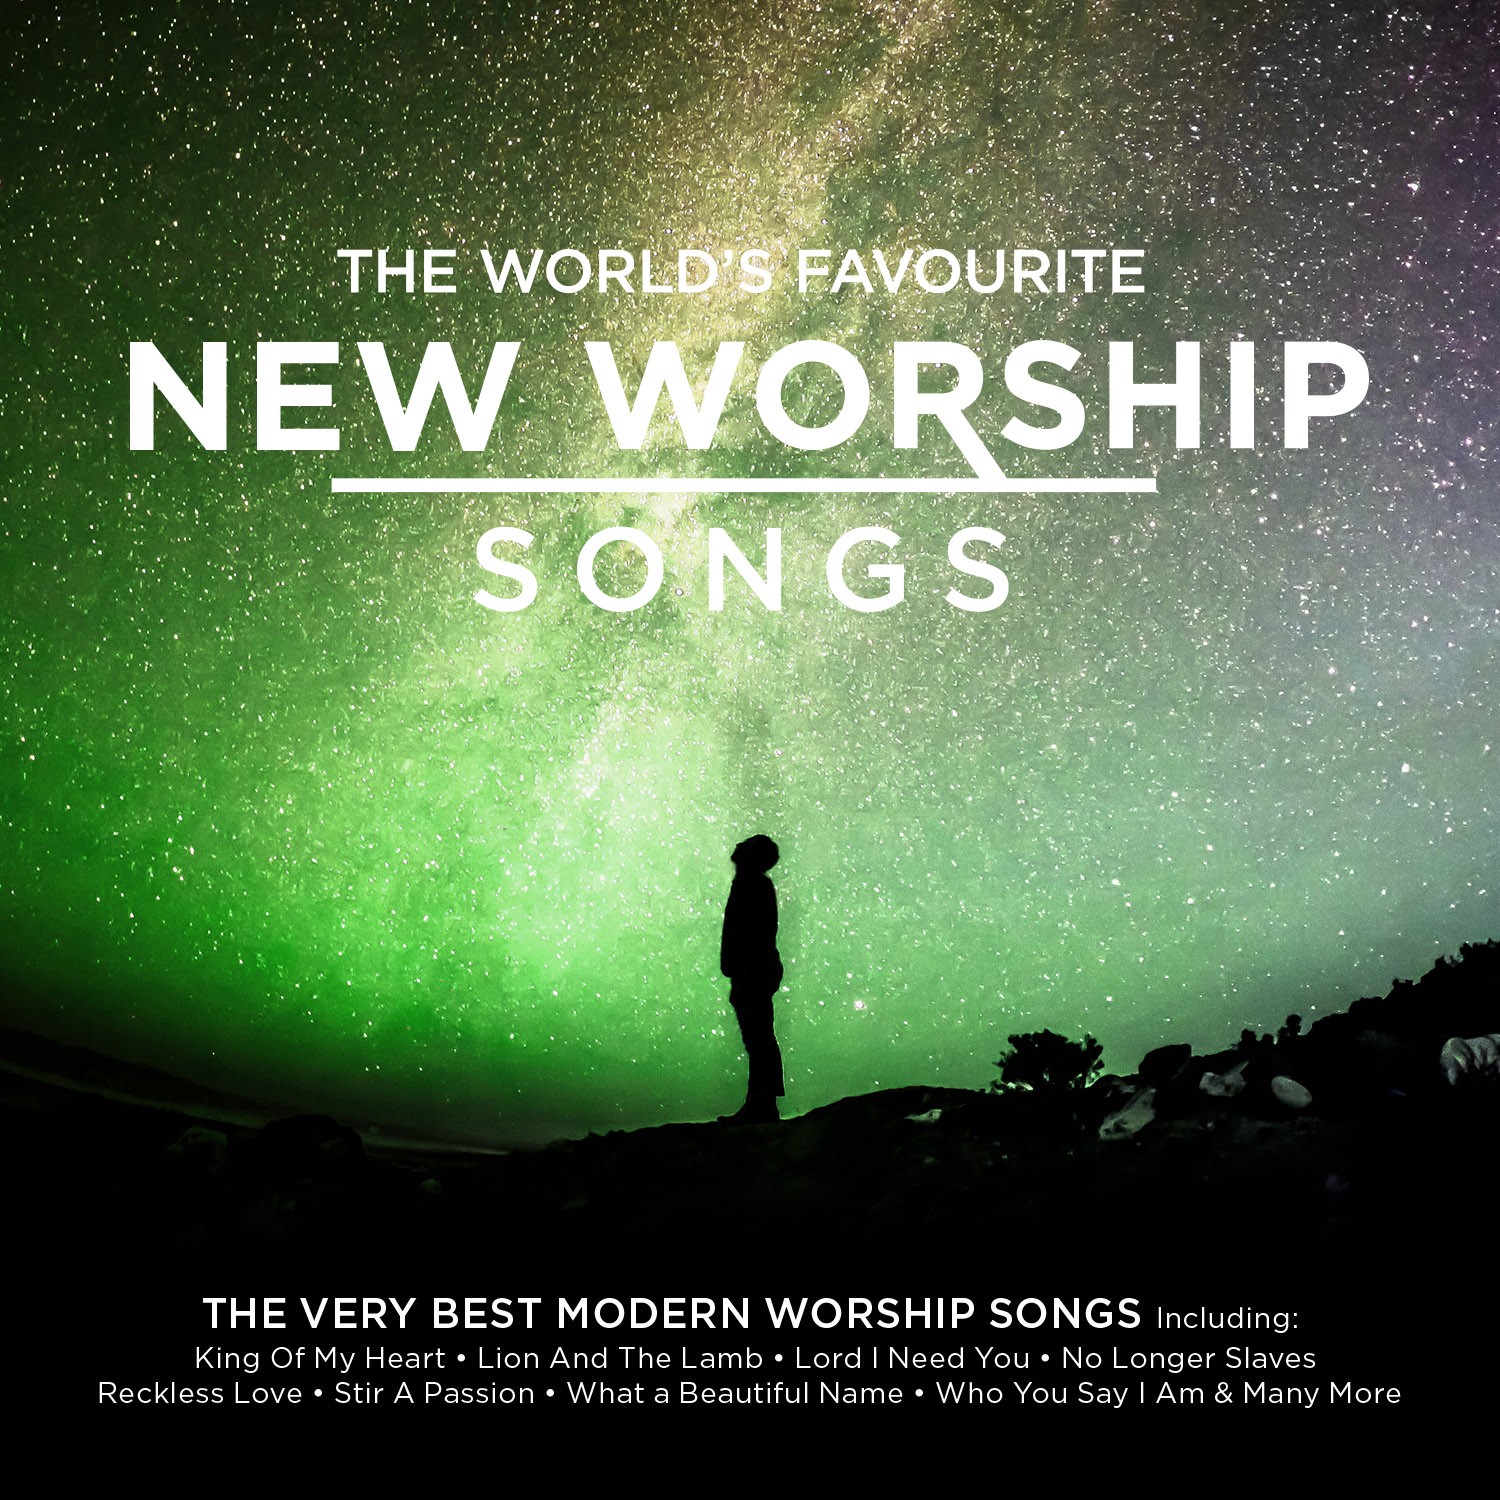 The World's Favourite New Worship Songs Eden.co.uk